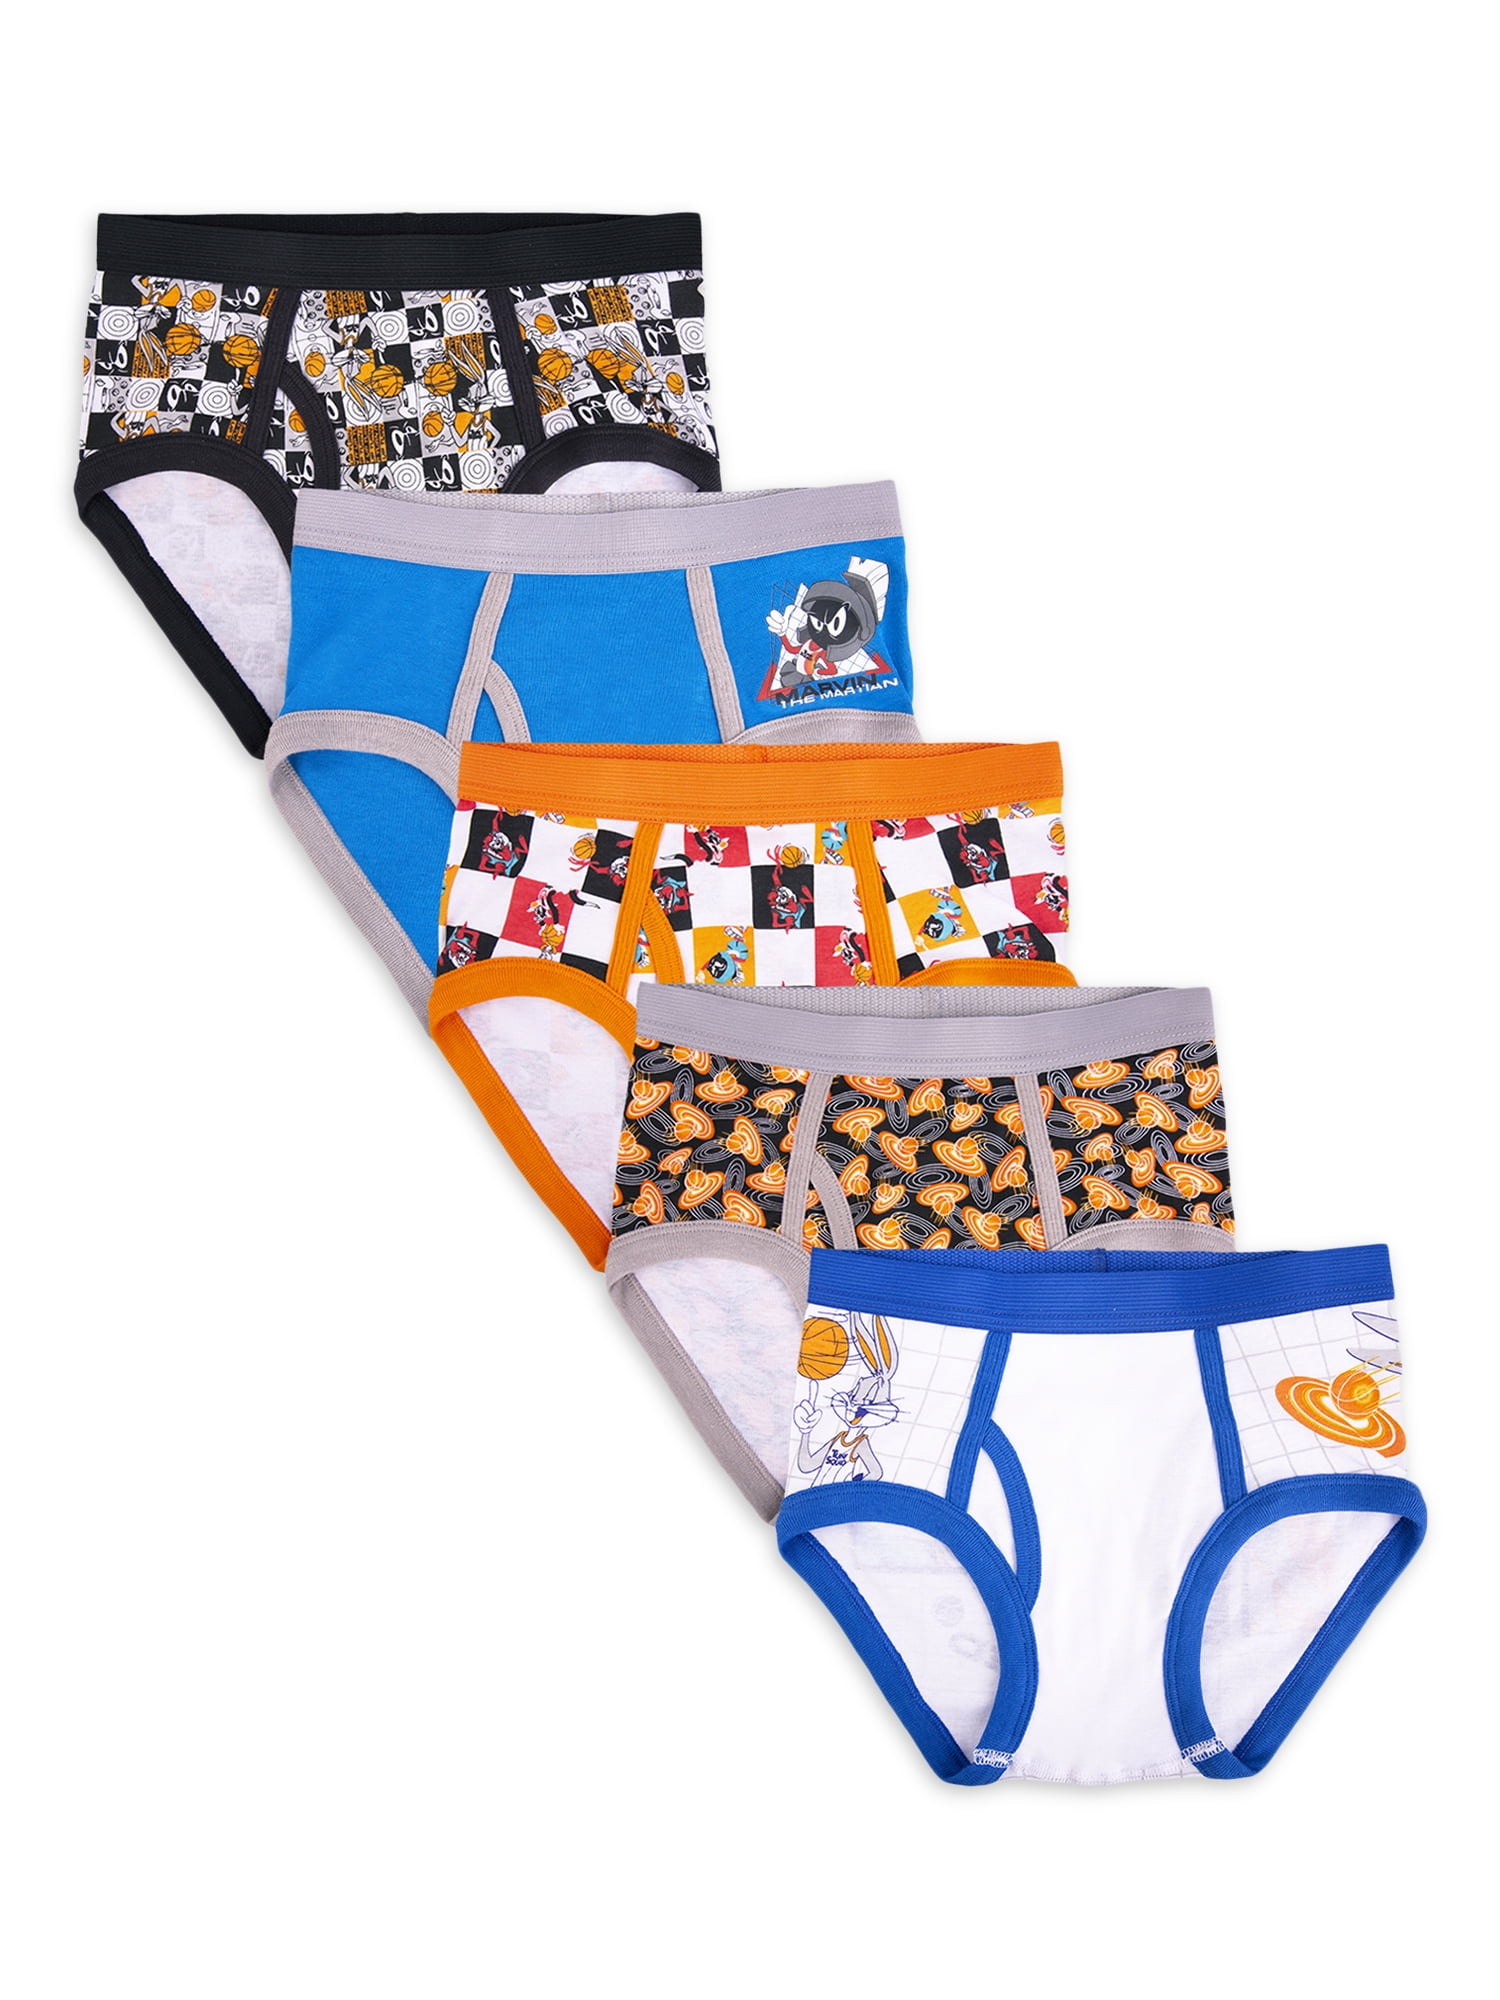 Space Jam Little Boys Brief, 5-Pack, Sizes 4-8 